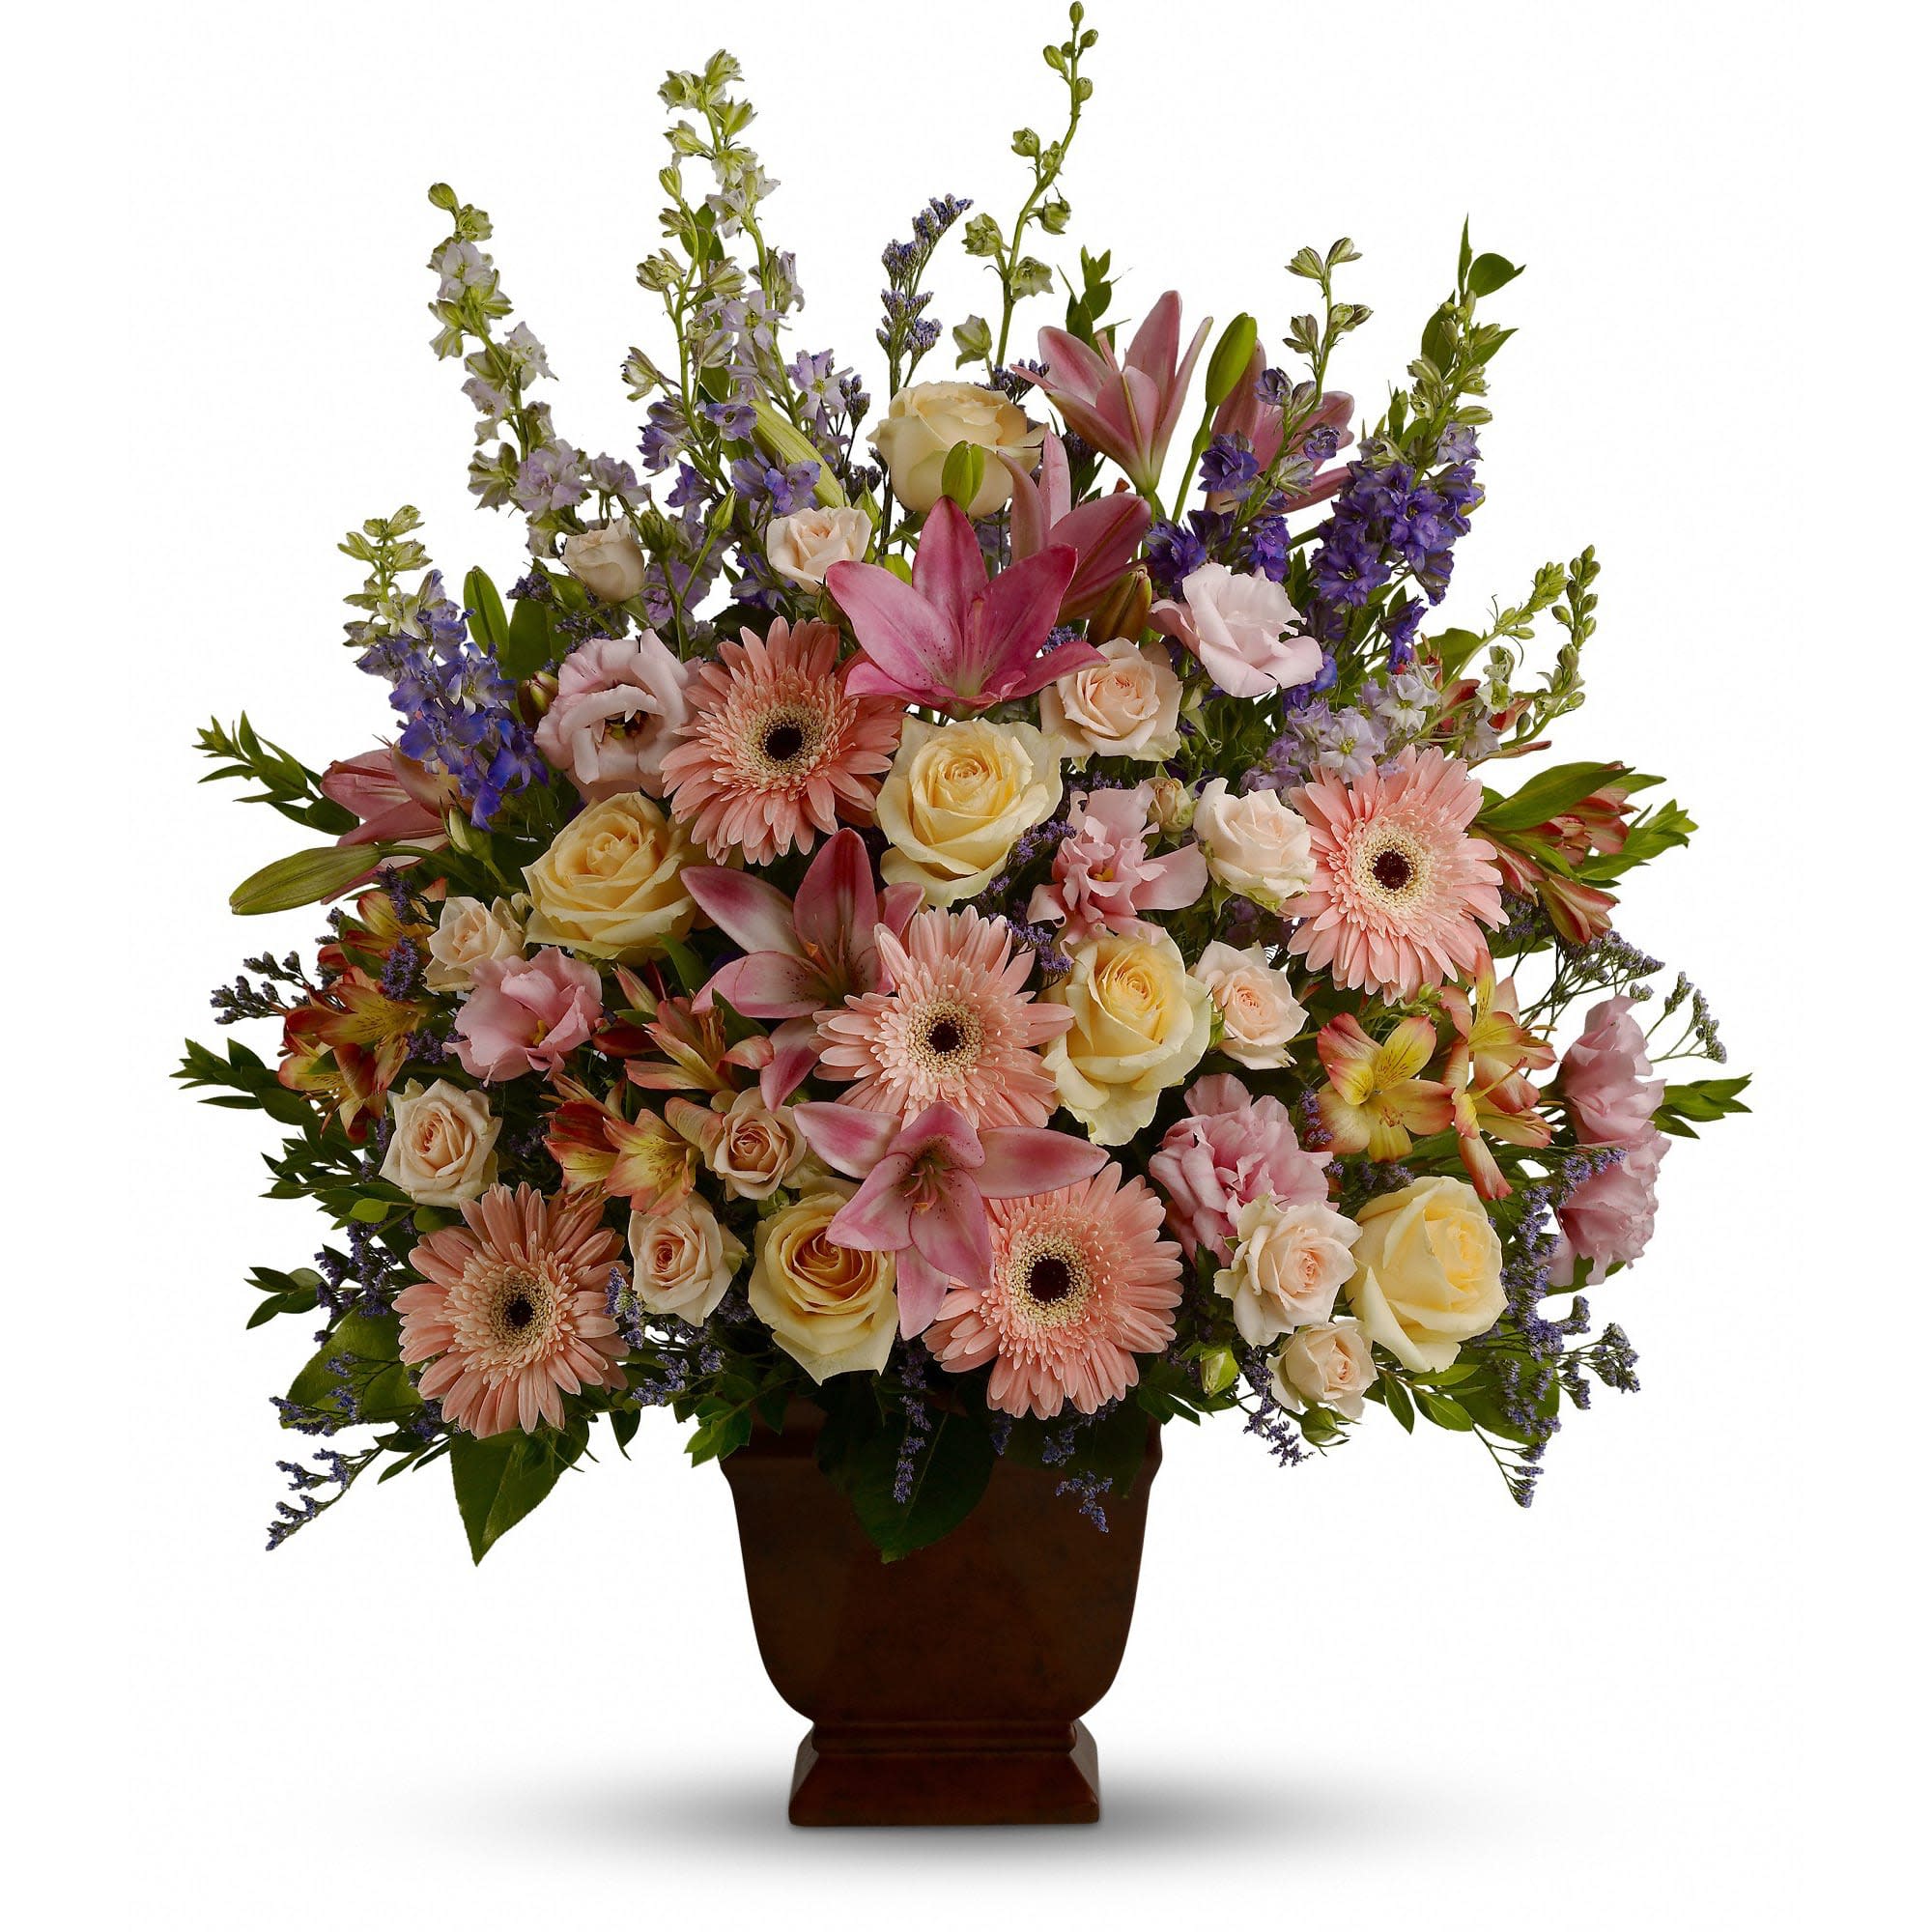 Teleflora's Loving Grace - A warm and peaceful bounty of pastel blossoms gently expresses love and respect. A gracefully composed arrangement appropriate for home or service. 